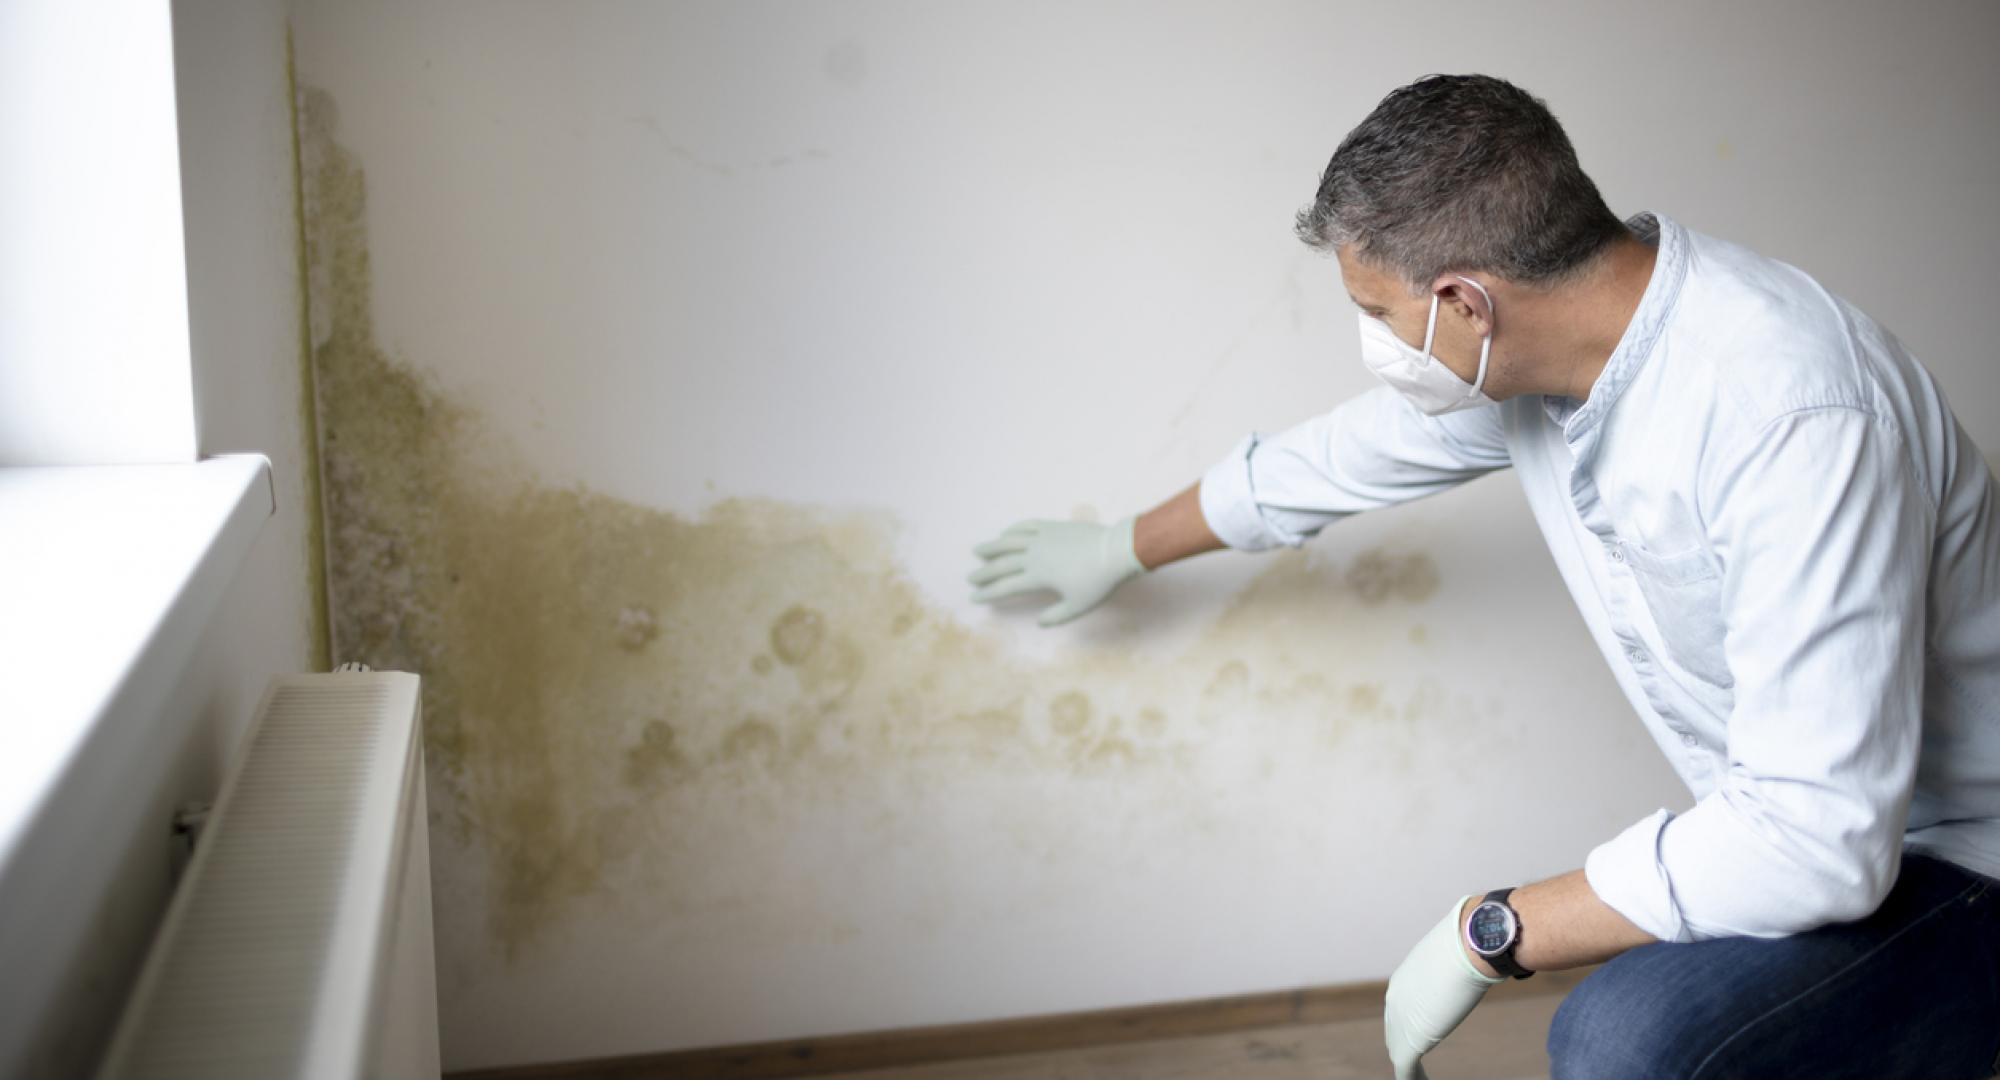 Man with mouth nose mask and blue shirt and gloves in front of white wall with mould